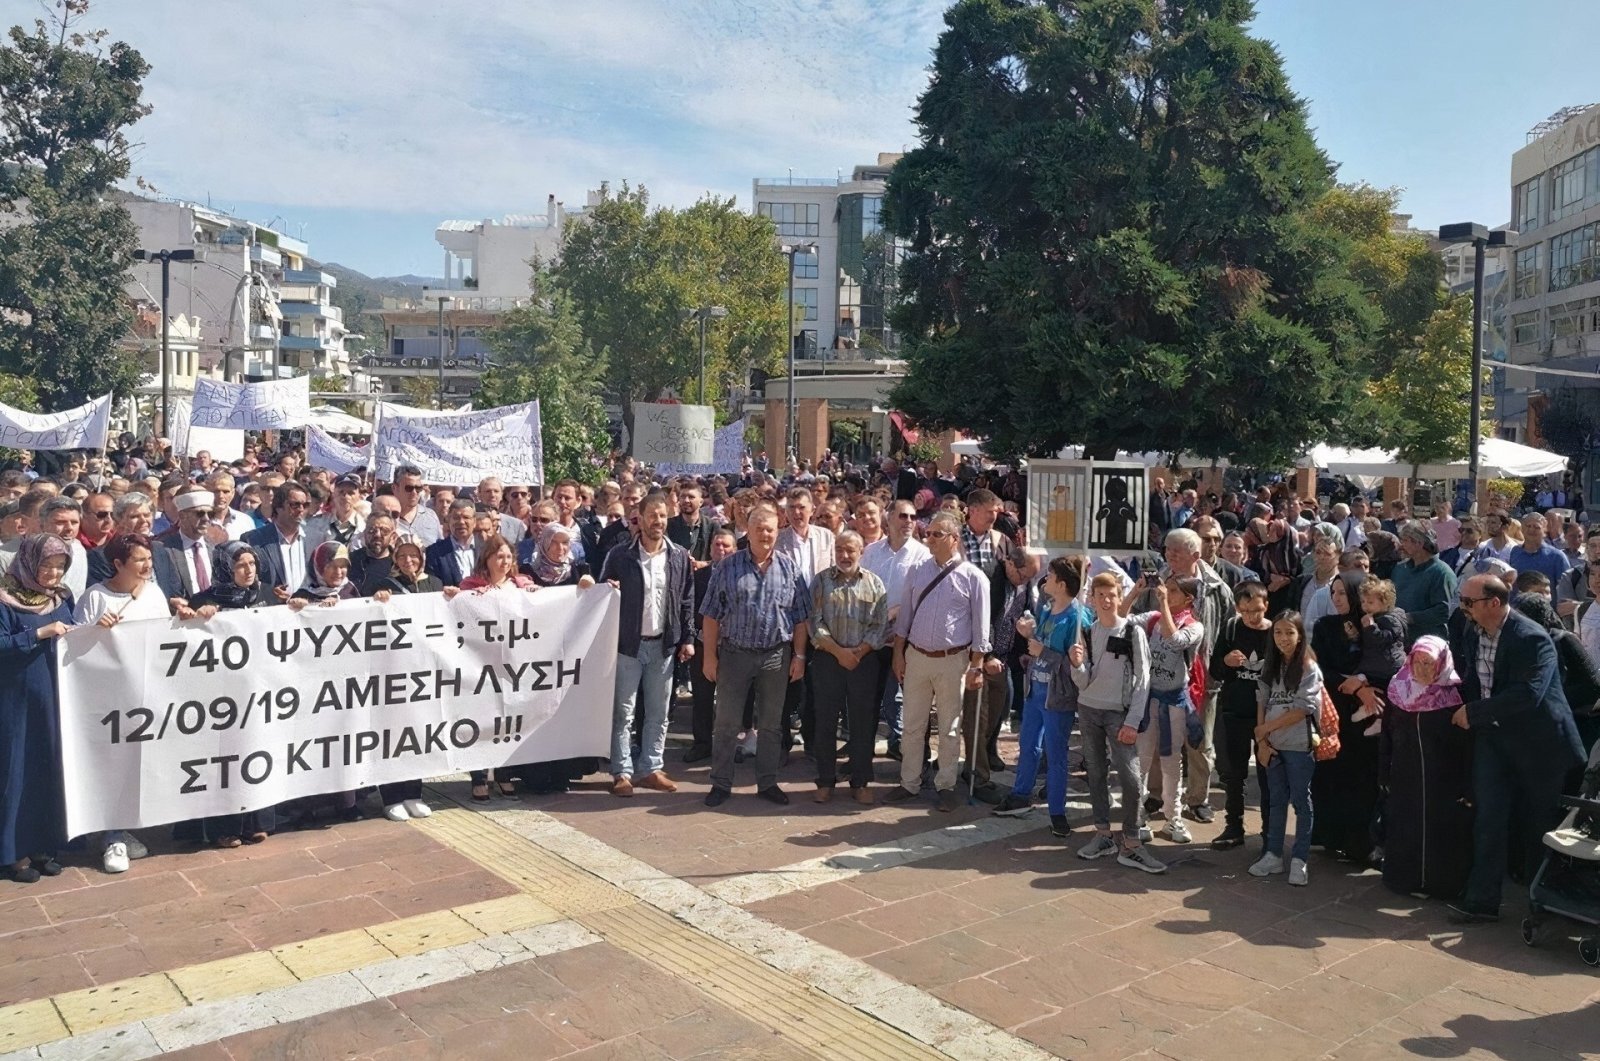 Turks in Western Thrace&#039;s Iskeçe (Xanthi) province protest the Greek government&#039;s assimilation policies in education, Iskeçe (Xanthi), Western Thrace, Greece, Sept. 24, 2019. (Sabah Photo)